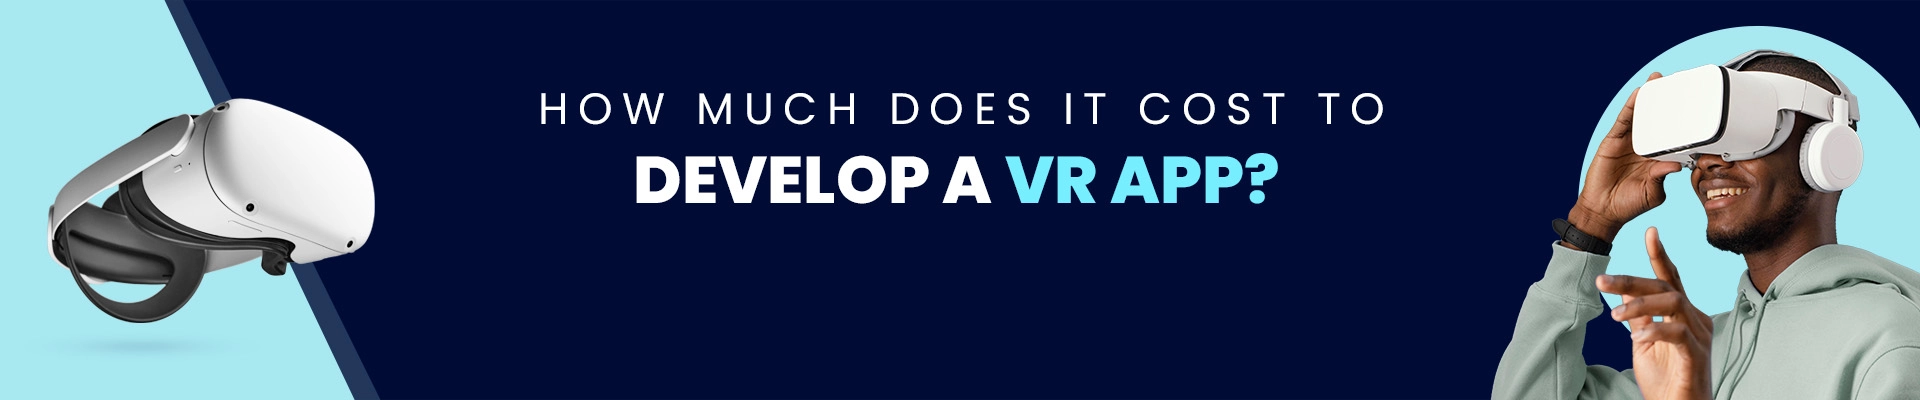 How much Does It Cost to Develop A VR App?